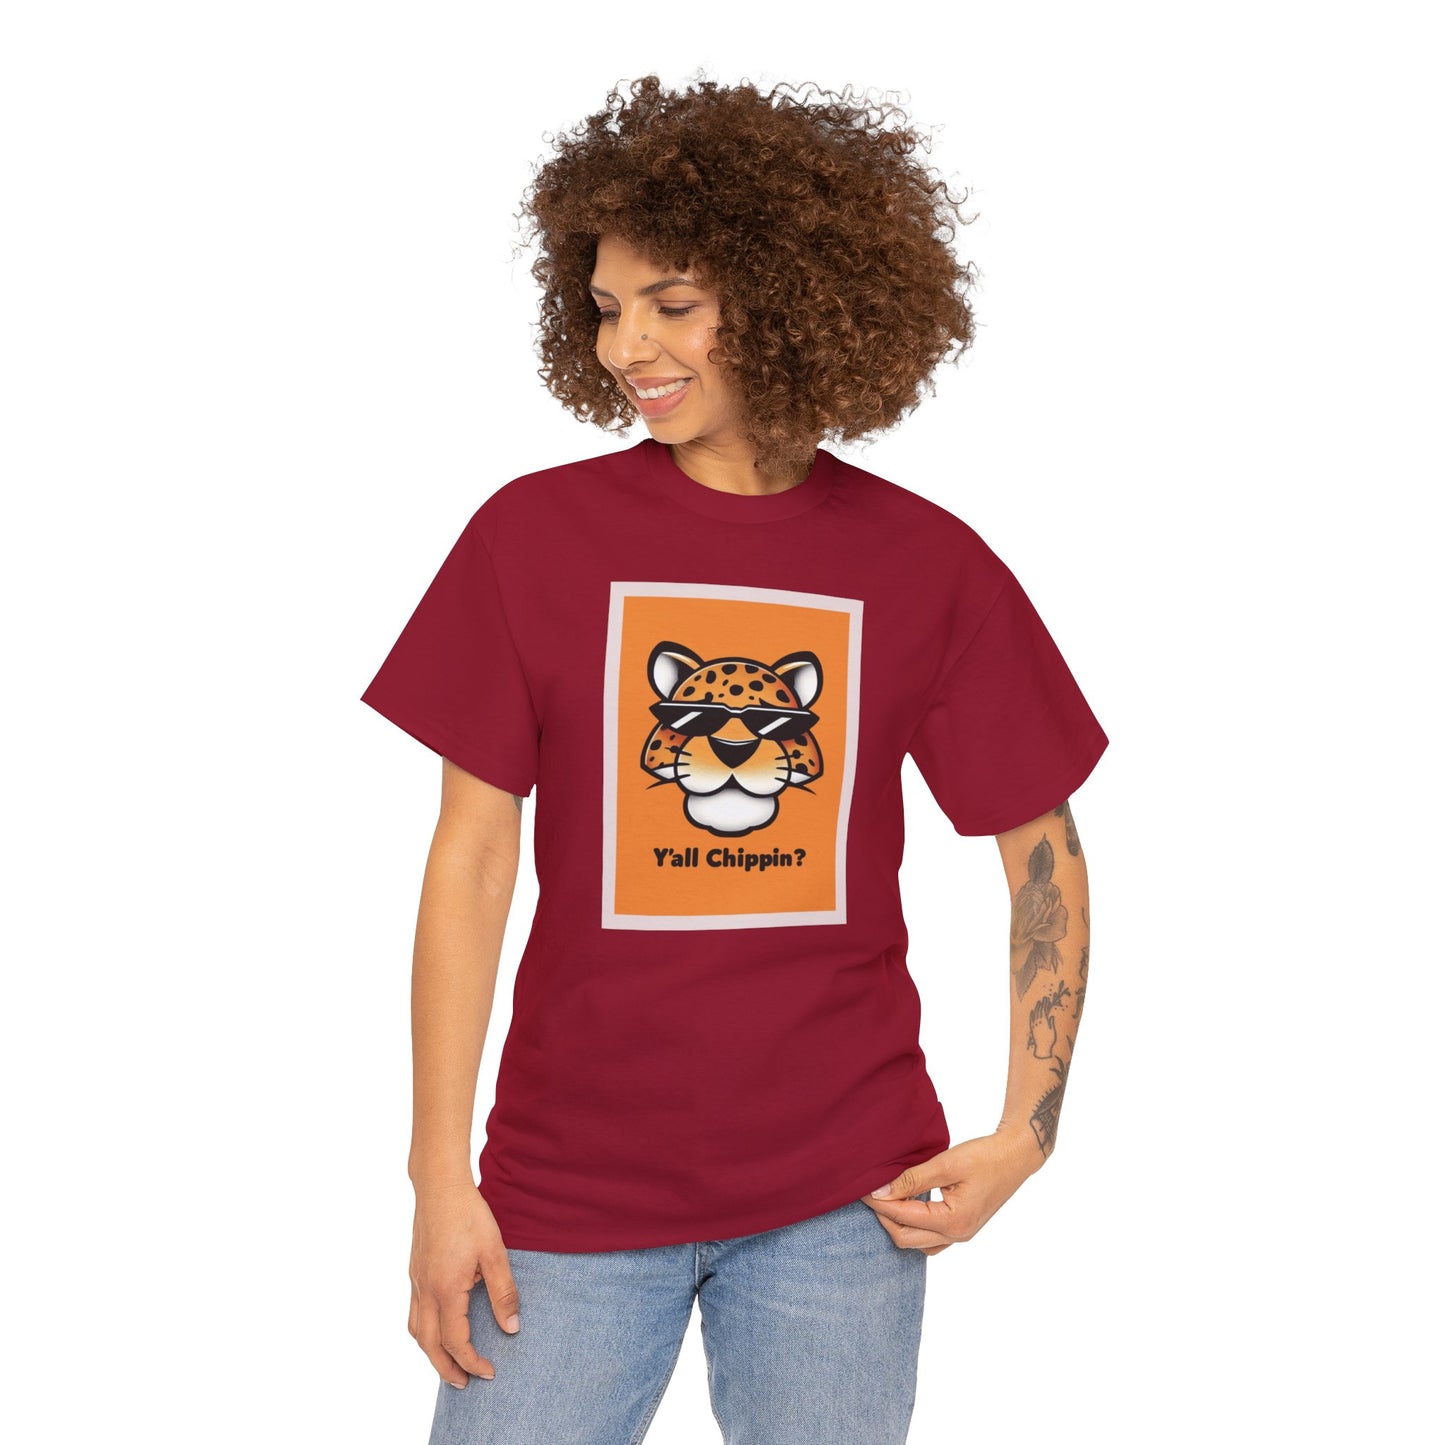 Chester's Chip Check: Y'all Chippin'? Unisex Graphic Tee